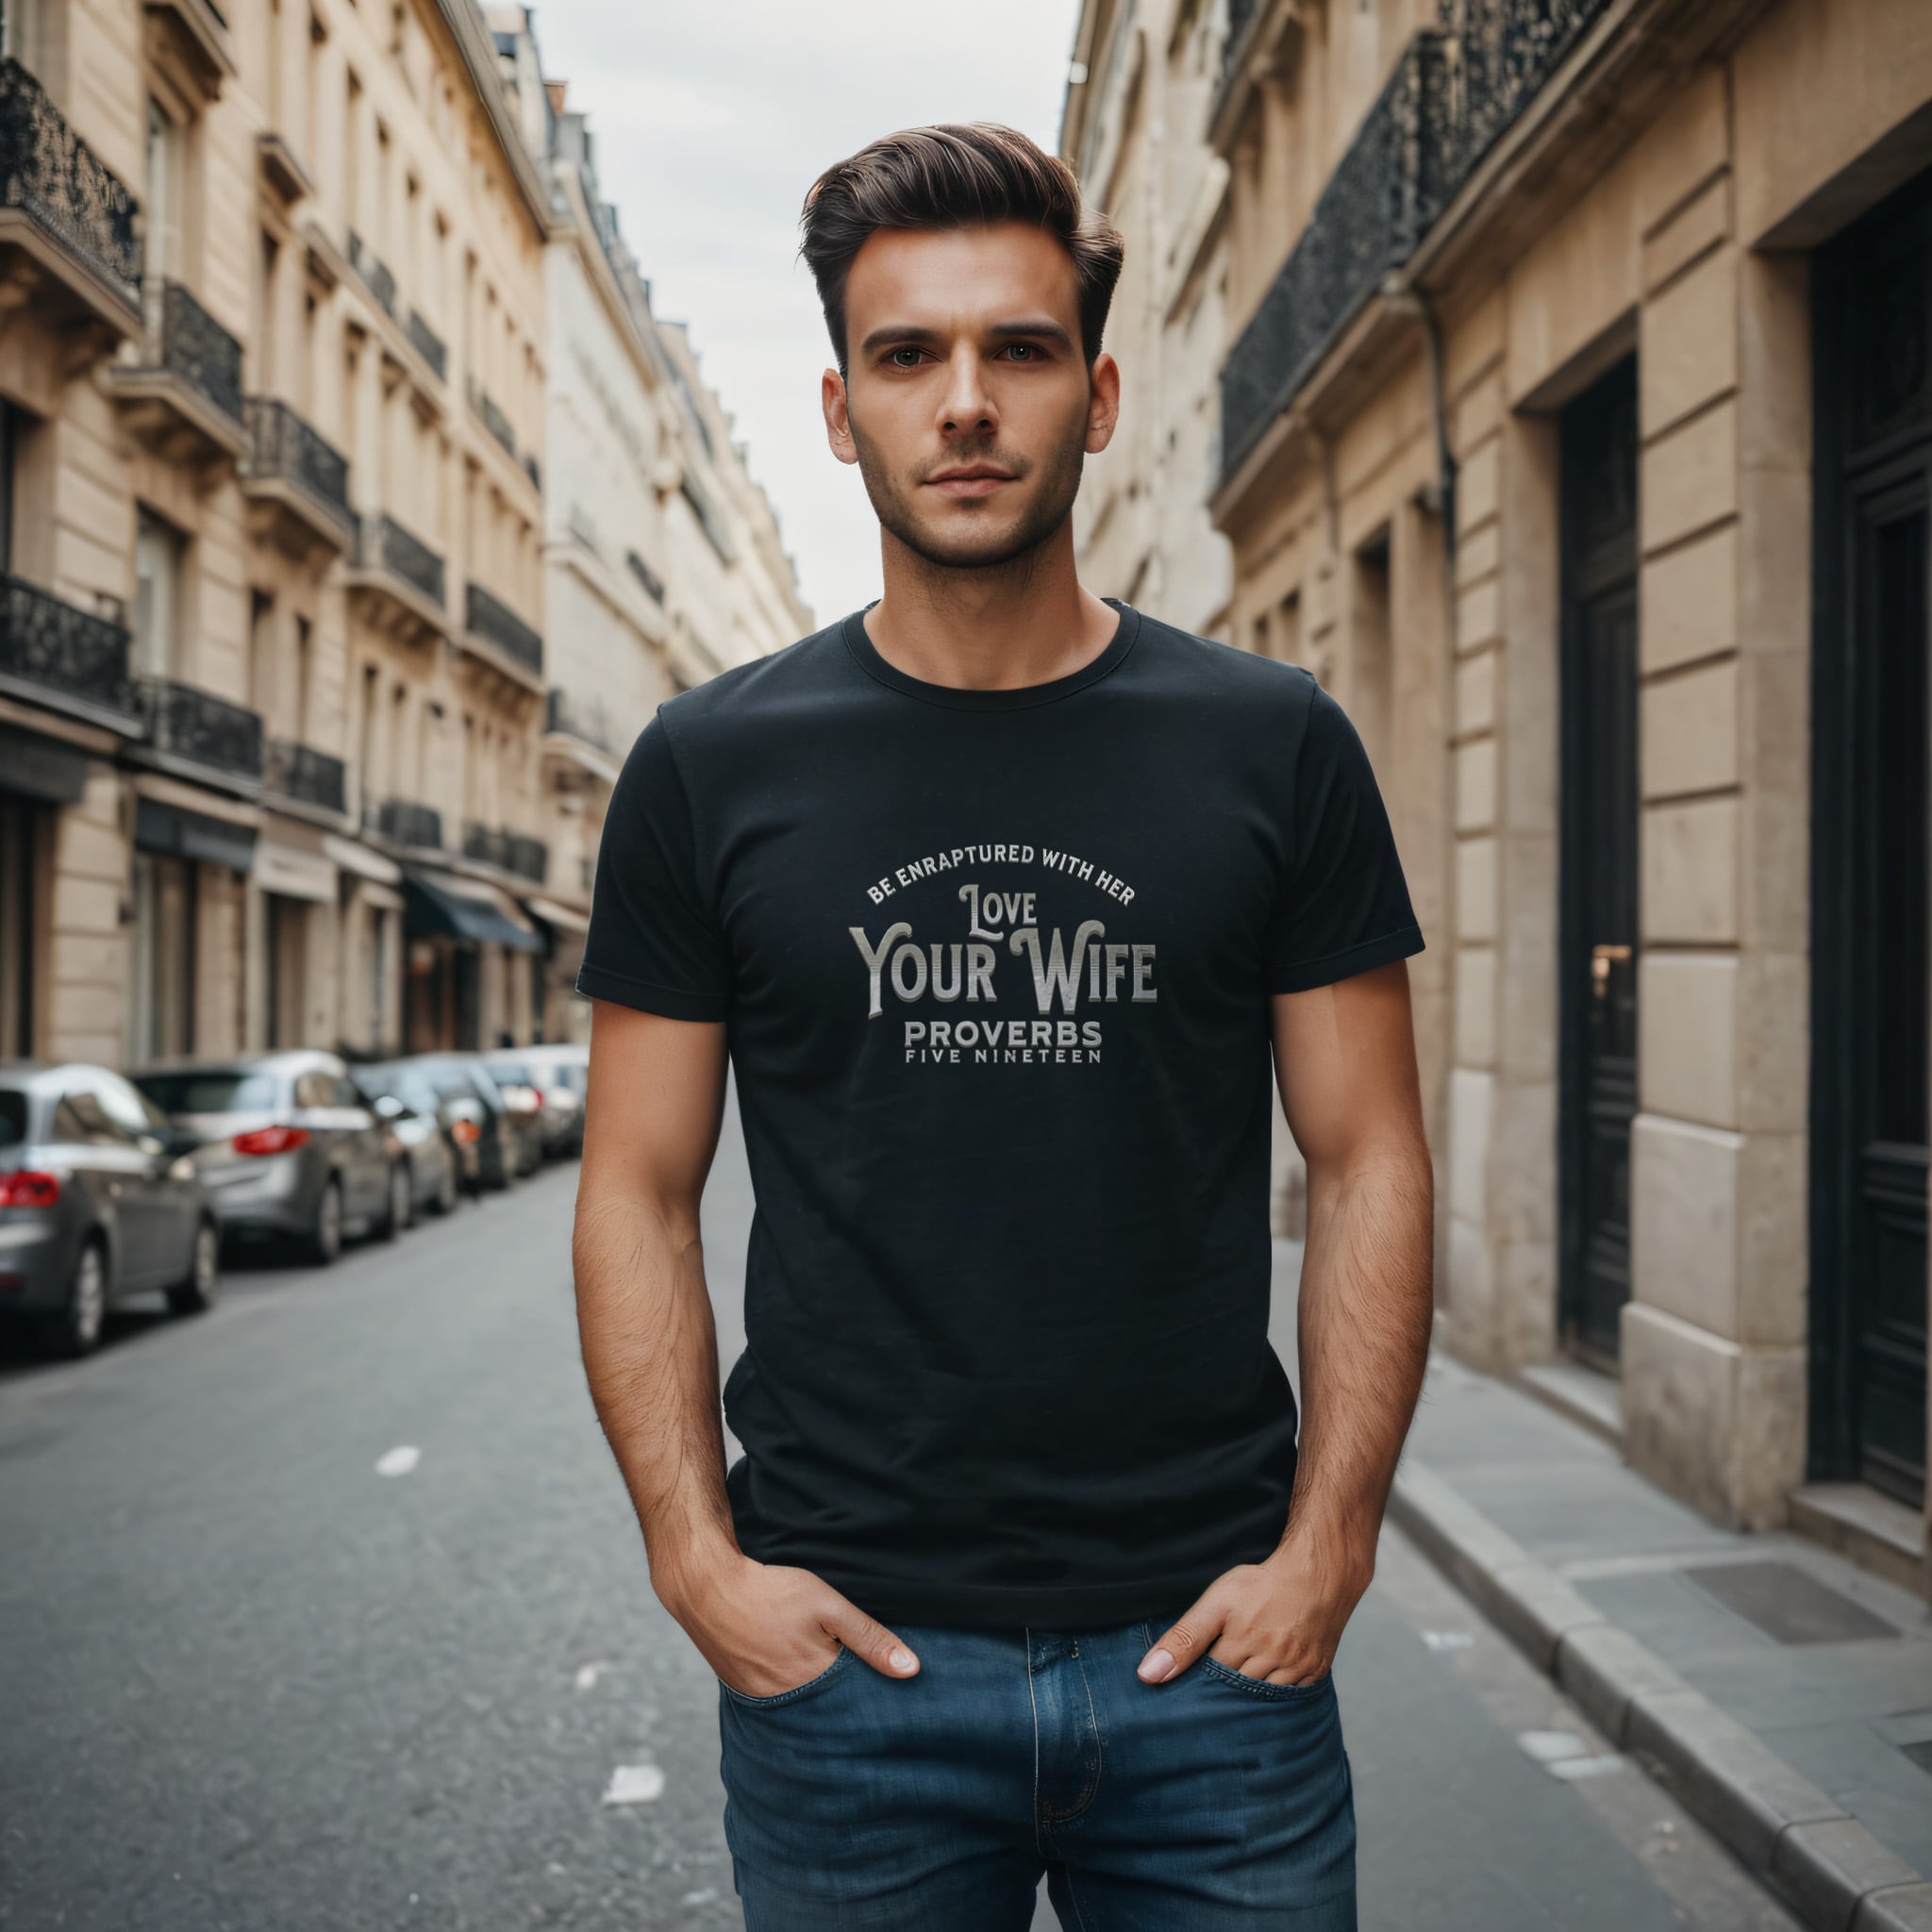 Love Your Wife t-shirt in vintage black